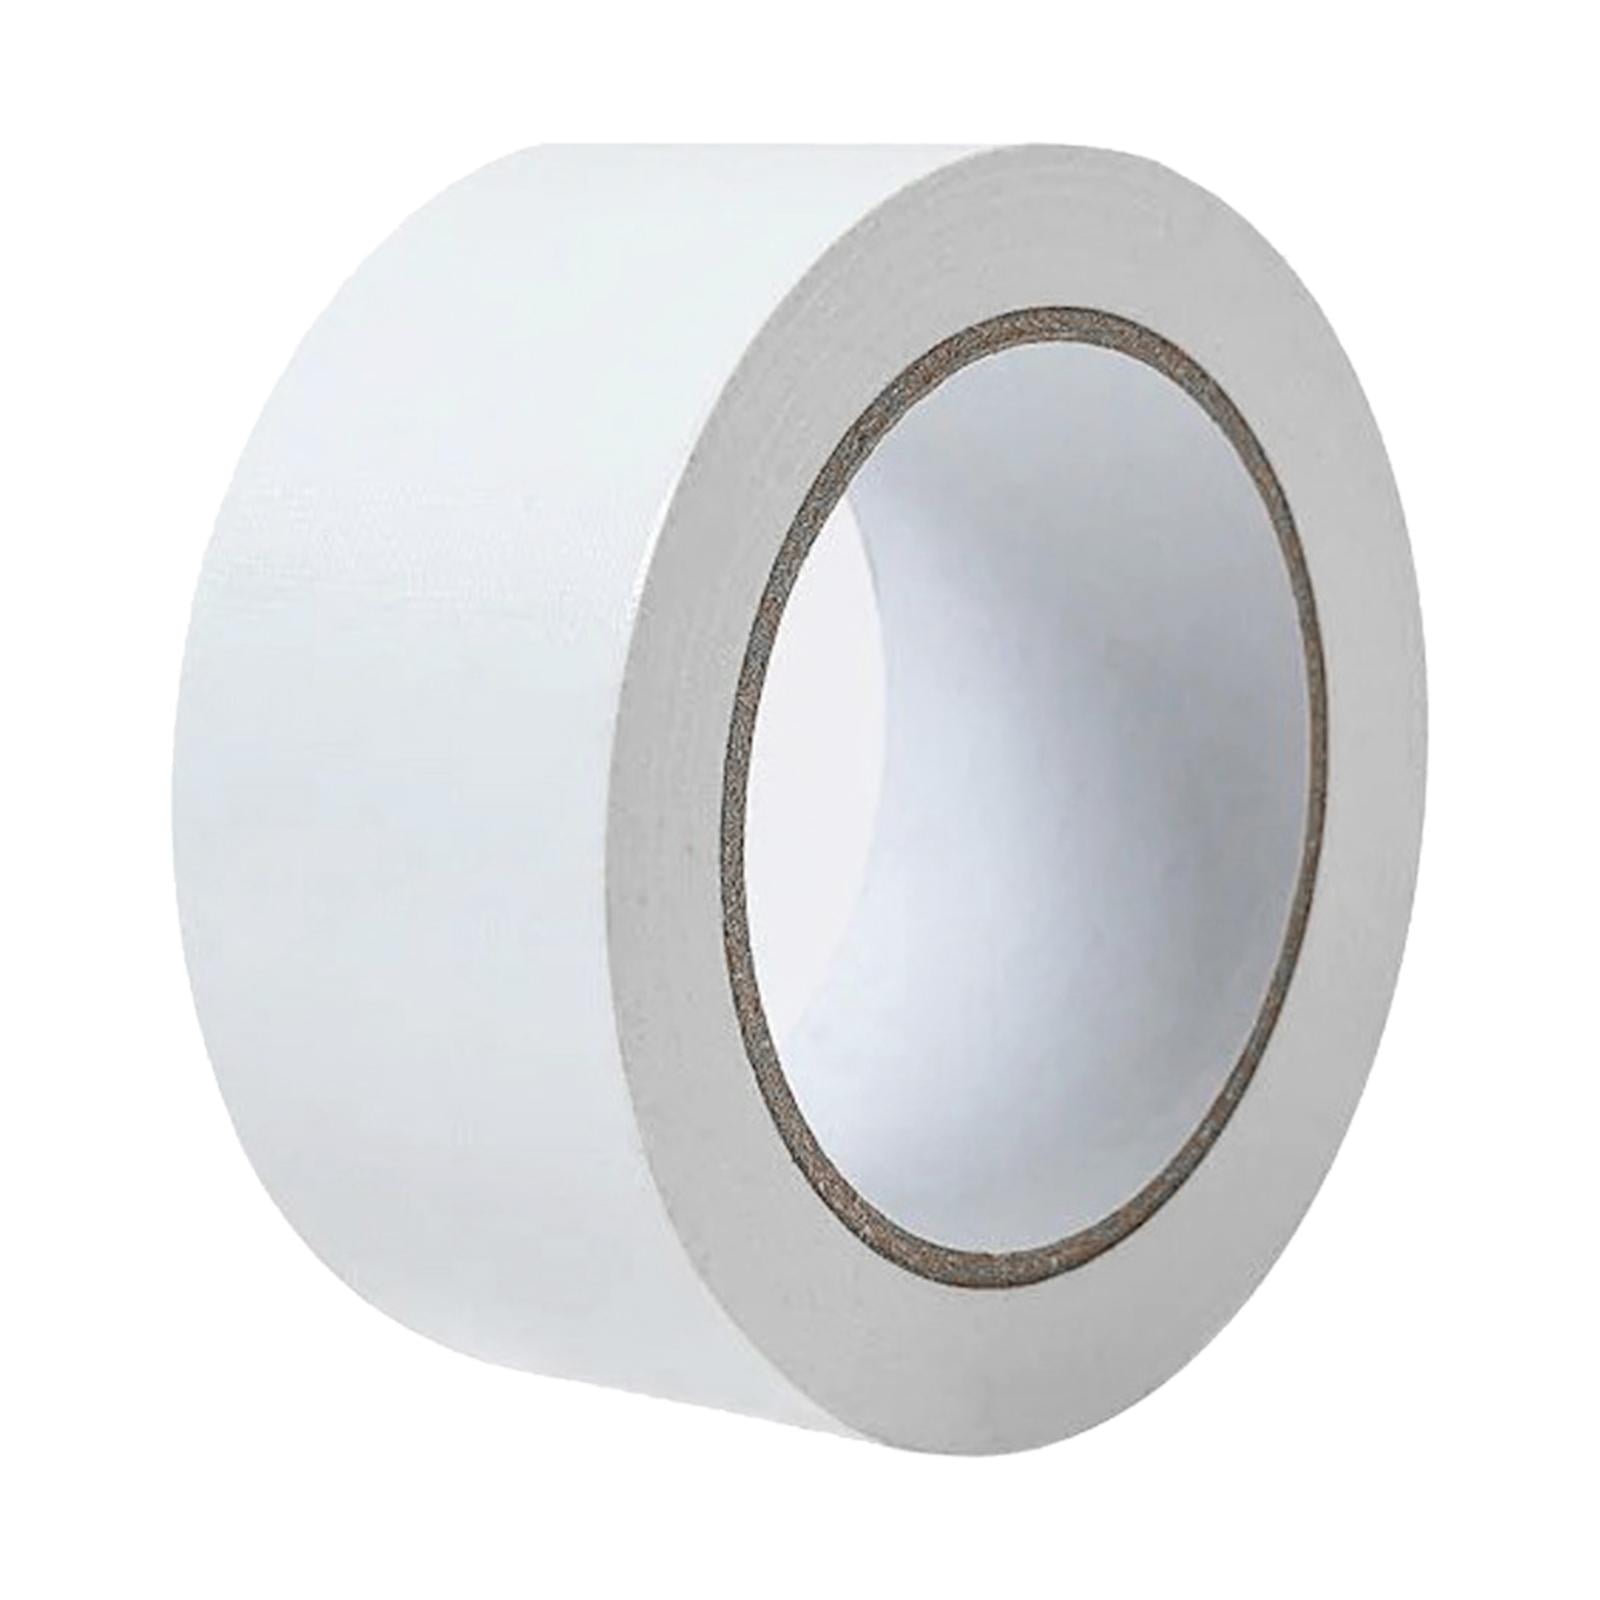 Double Sided Clear Mounting Tape 1.2 Wide, 9.8' Long Acrylic Gel Tape for  Temps 0-100, Heavy Duty Multipurpose by KapStrom 